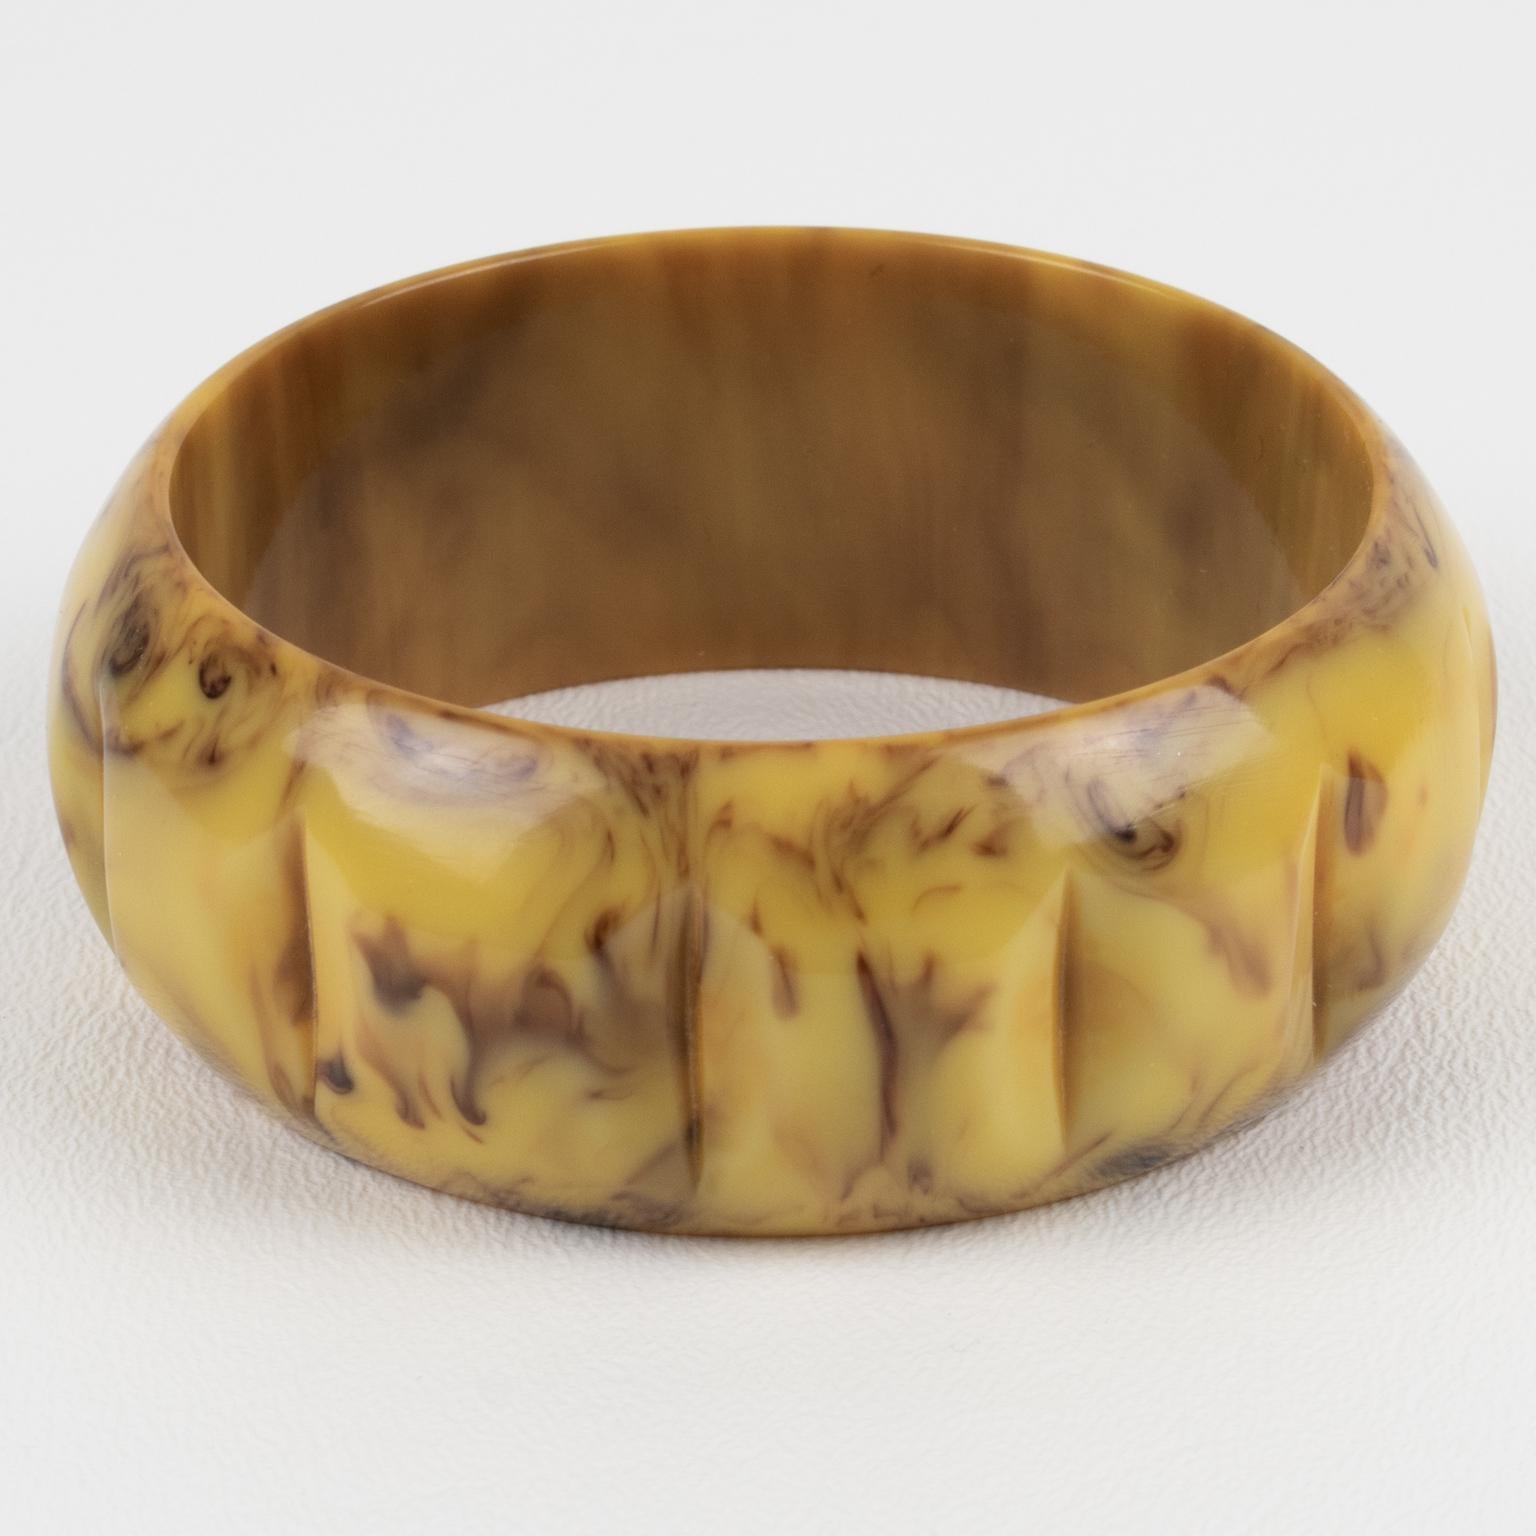 This is a lovely banana and chocolate marble Bakelite carved bracelet bangle. It features a chunky domed shape with deep geometric carving all around. The color is an intense light yellow banana marble tone with cloudy chocolate